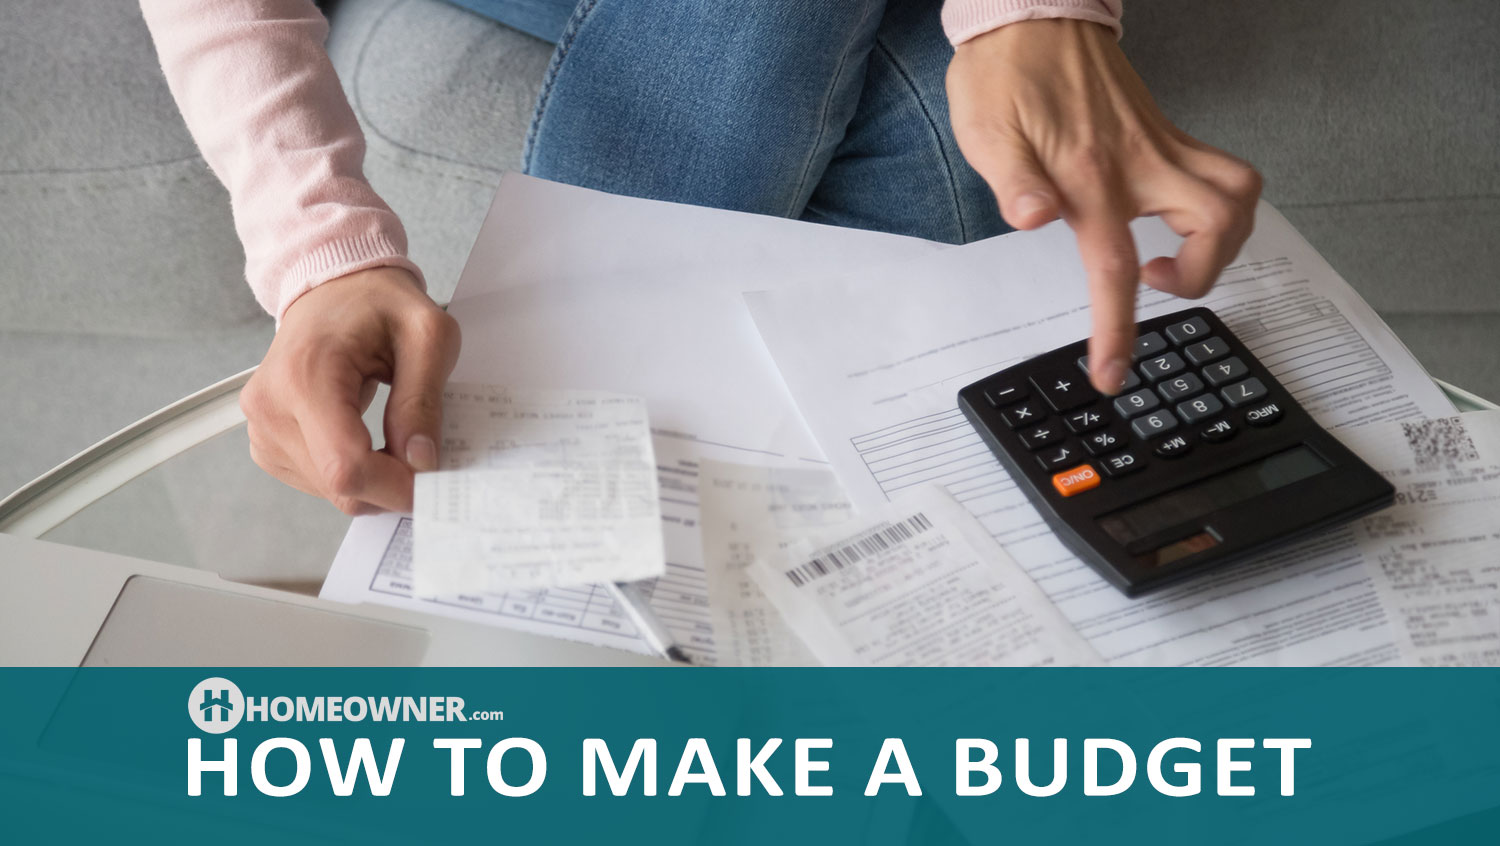 How To Make a Personal Budget in 9 Steps